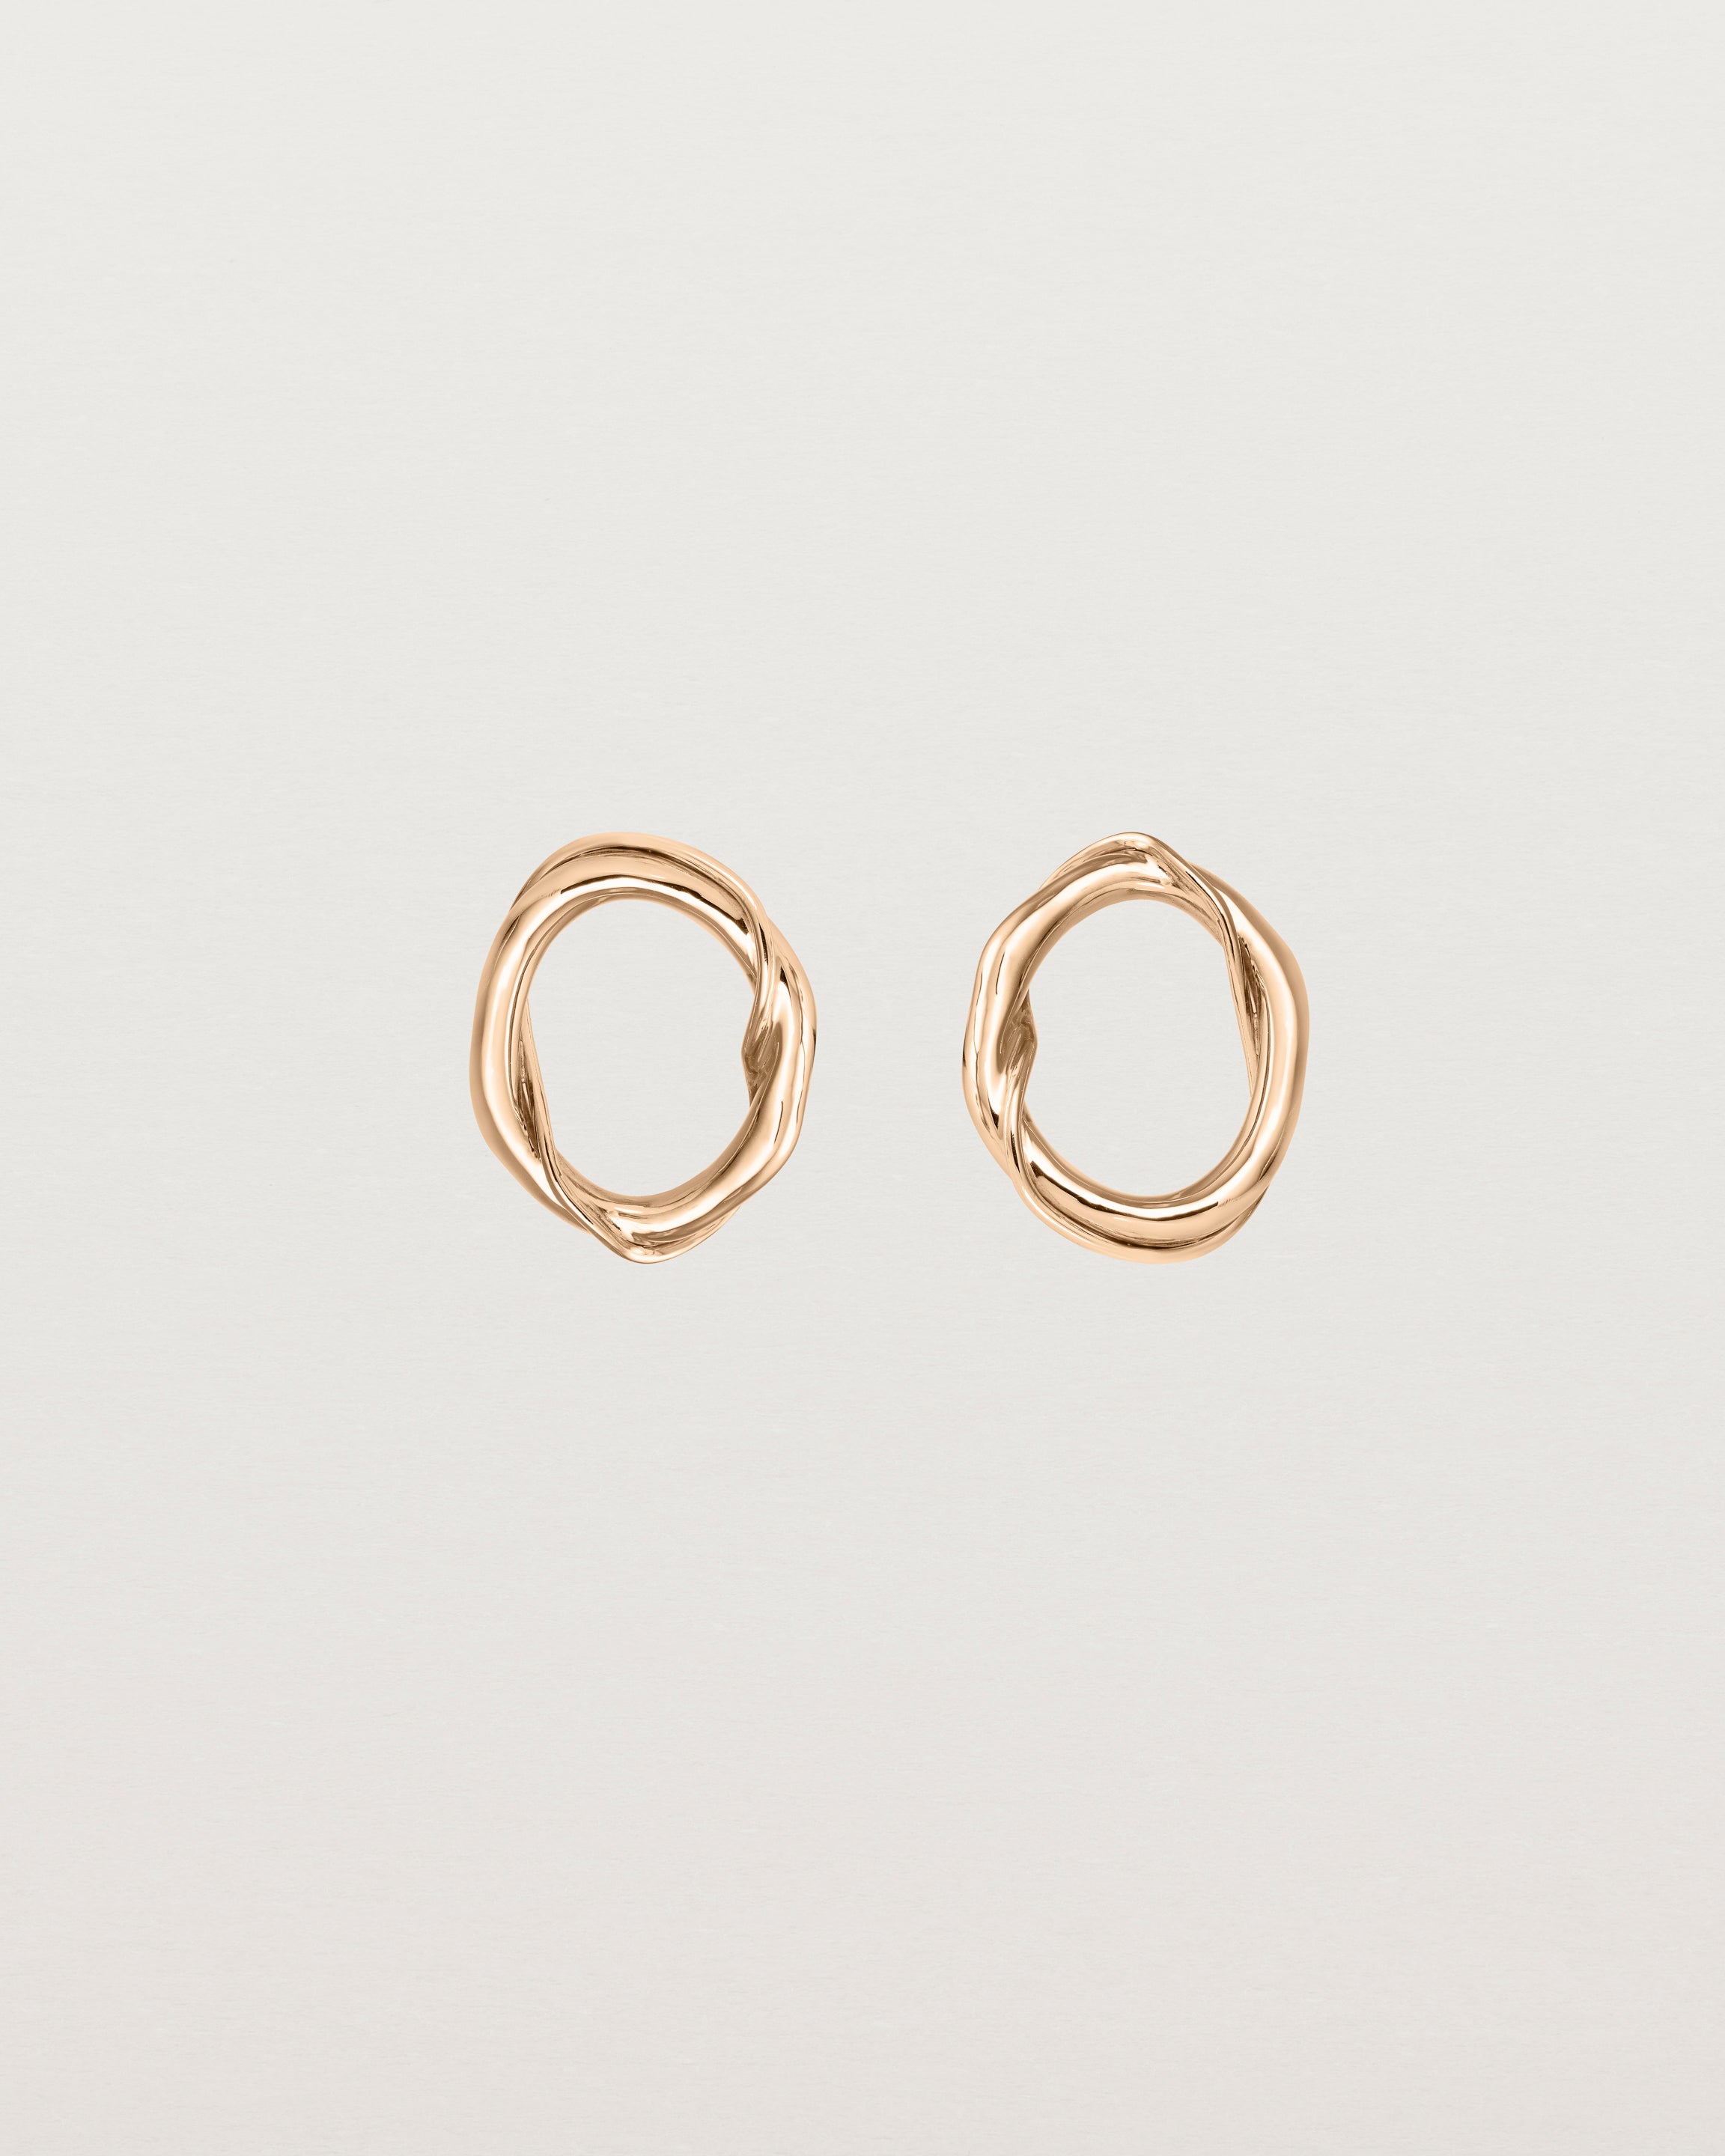 Front view of the Petite Dalí Earrings in rose gold.